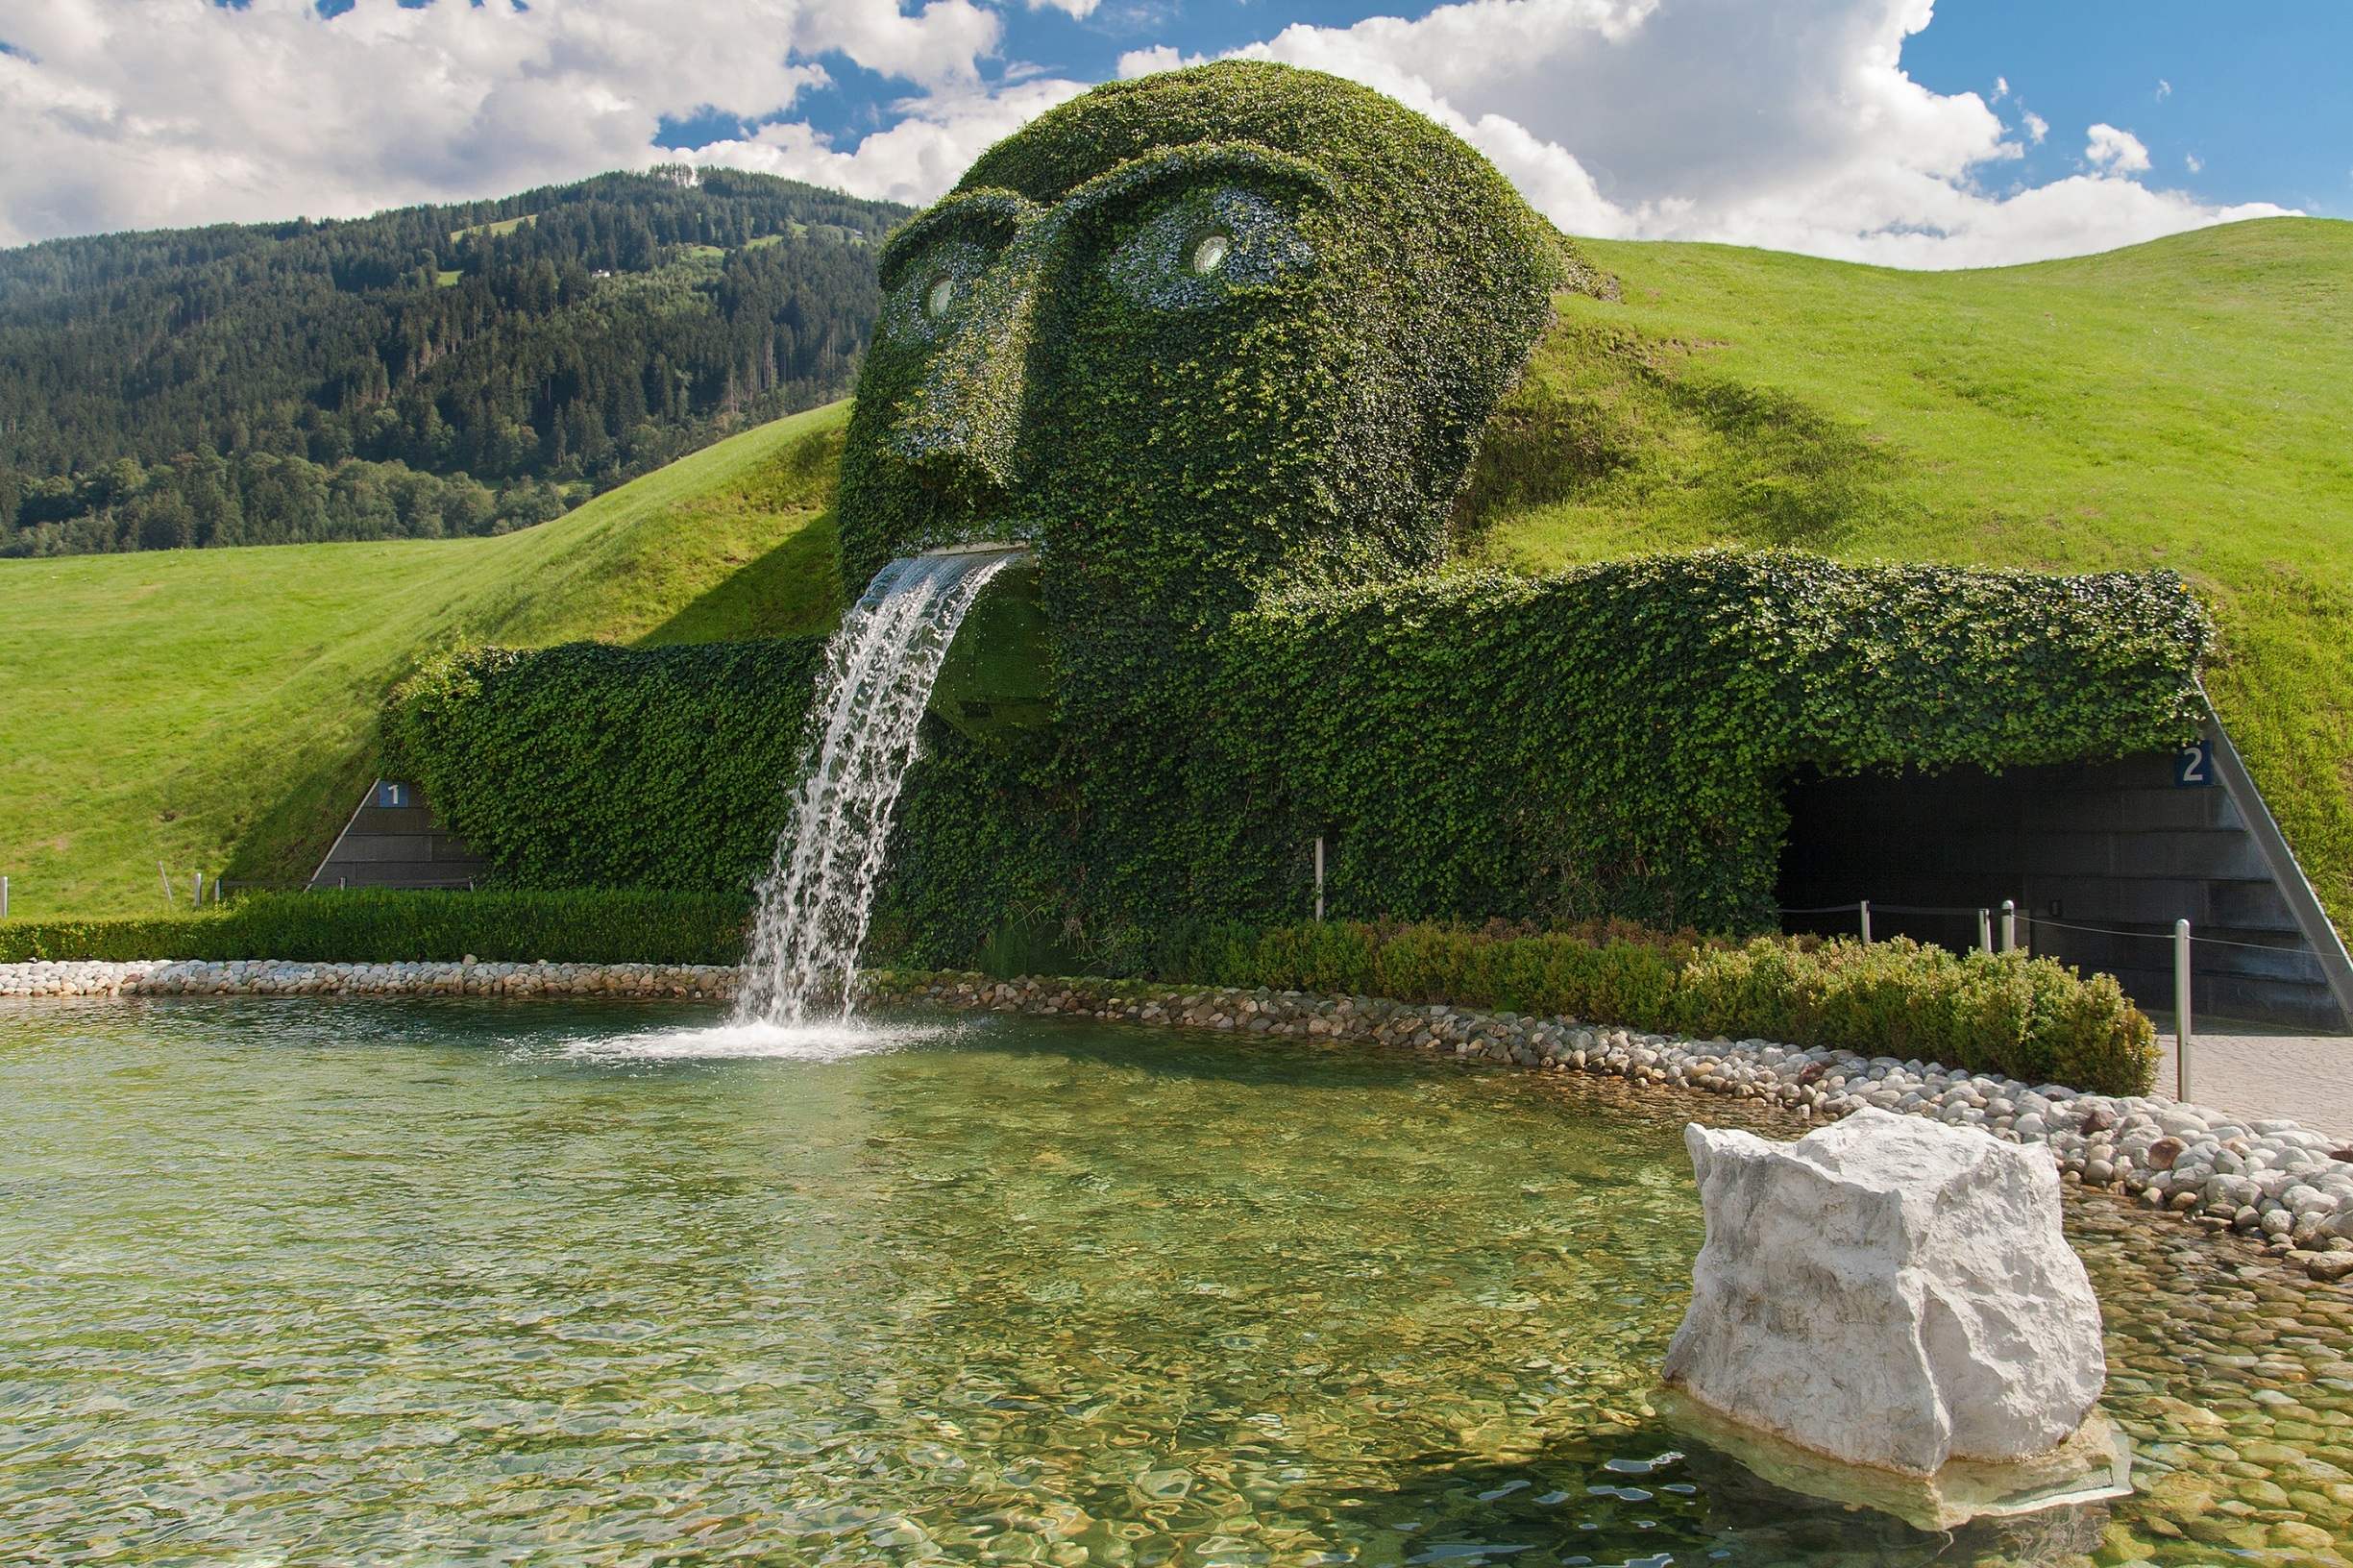 Wattens, Austria - August 18, 2011: The Giant, waterspout and fountain at the entrance of Swarovski Kristallwelten in Wattens, Austria.